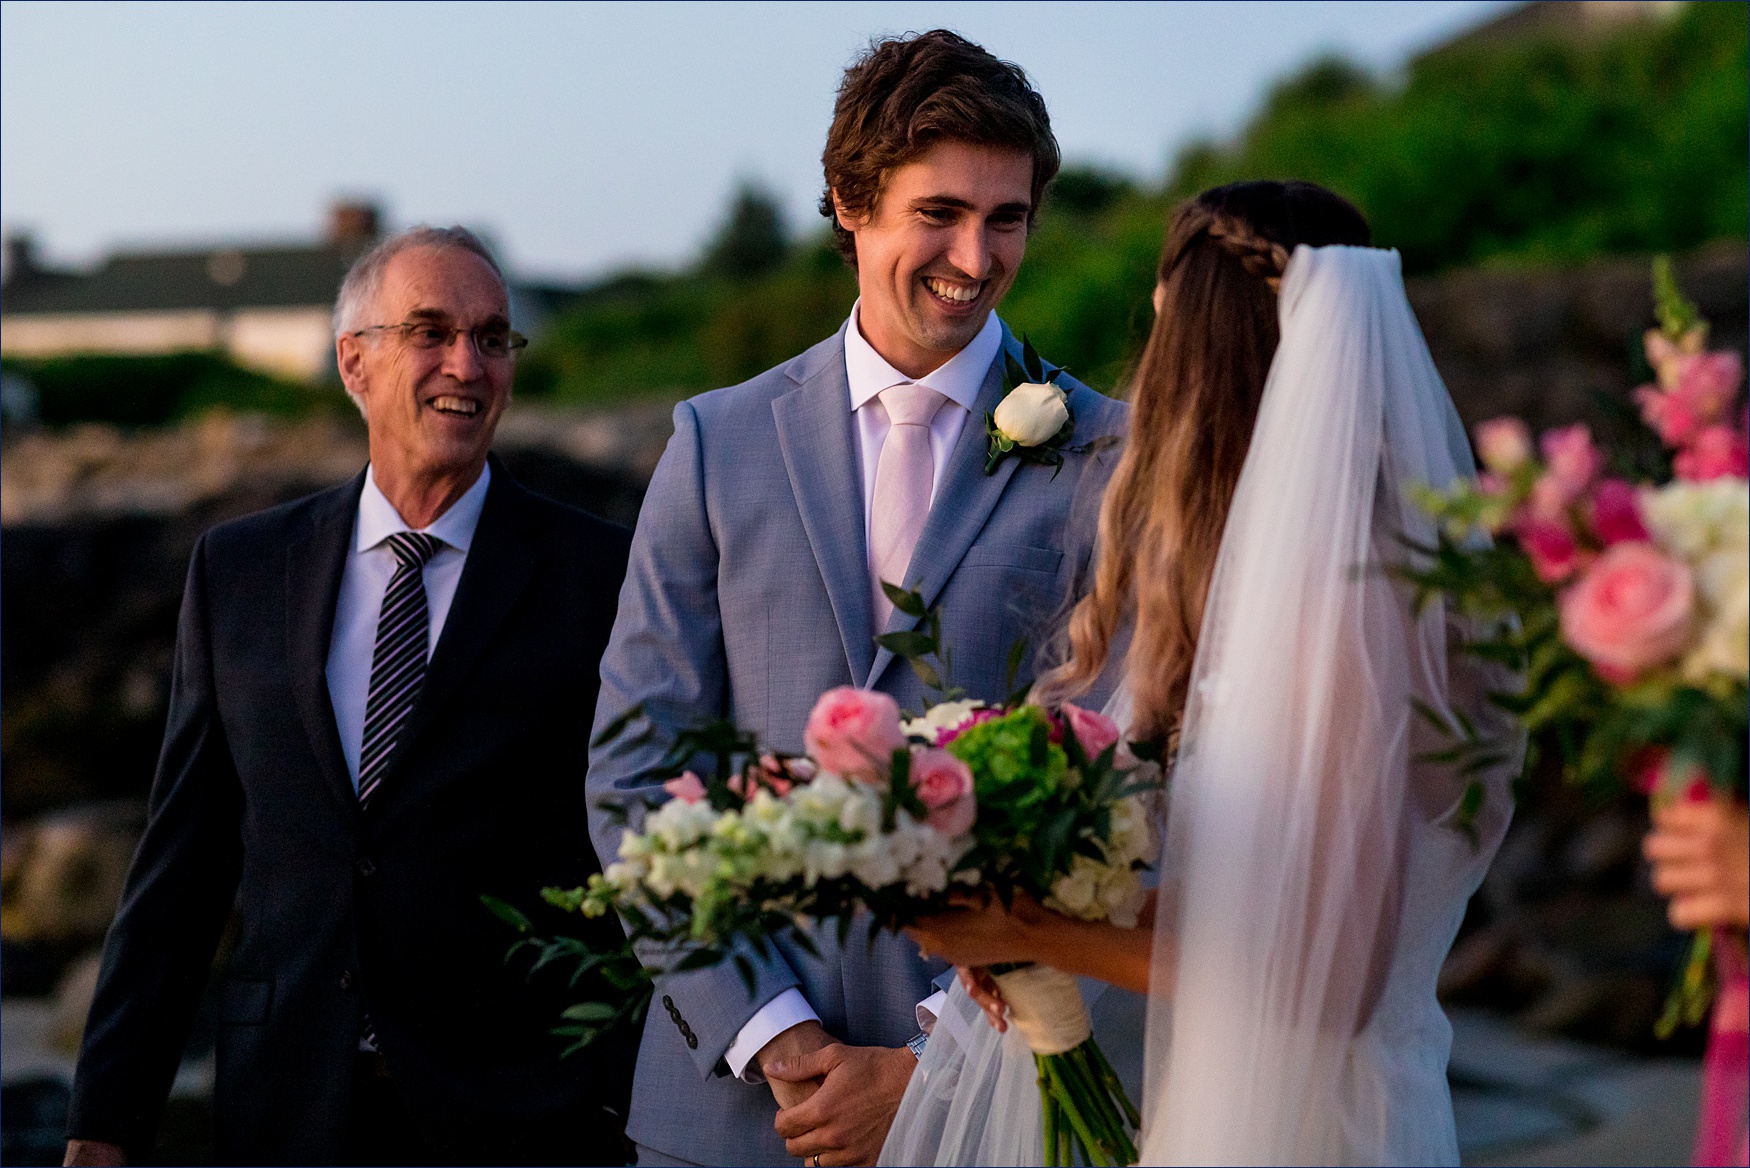 The groom smiles warmly at his new wife after their sunrise ceremony